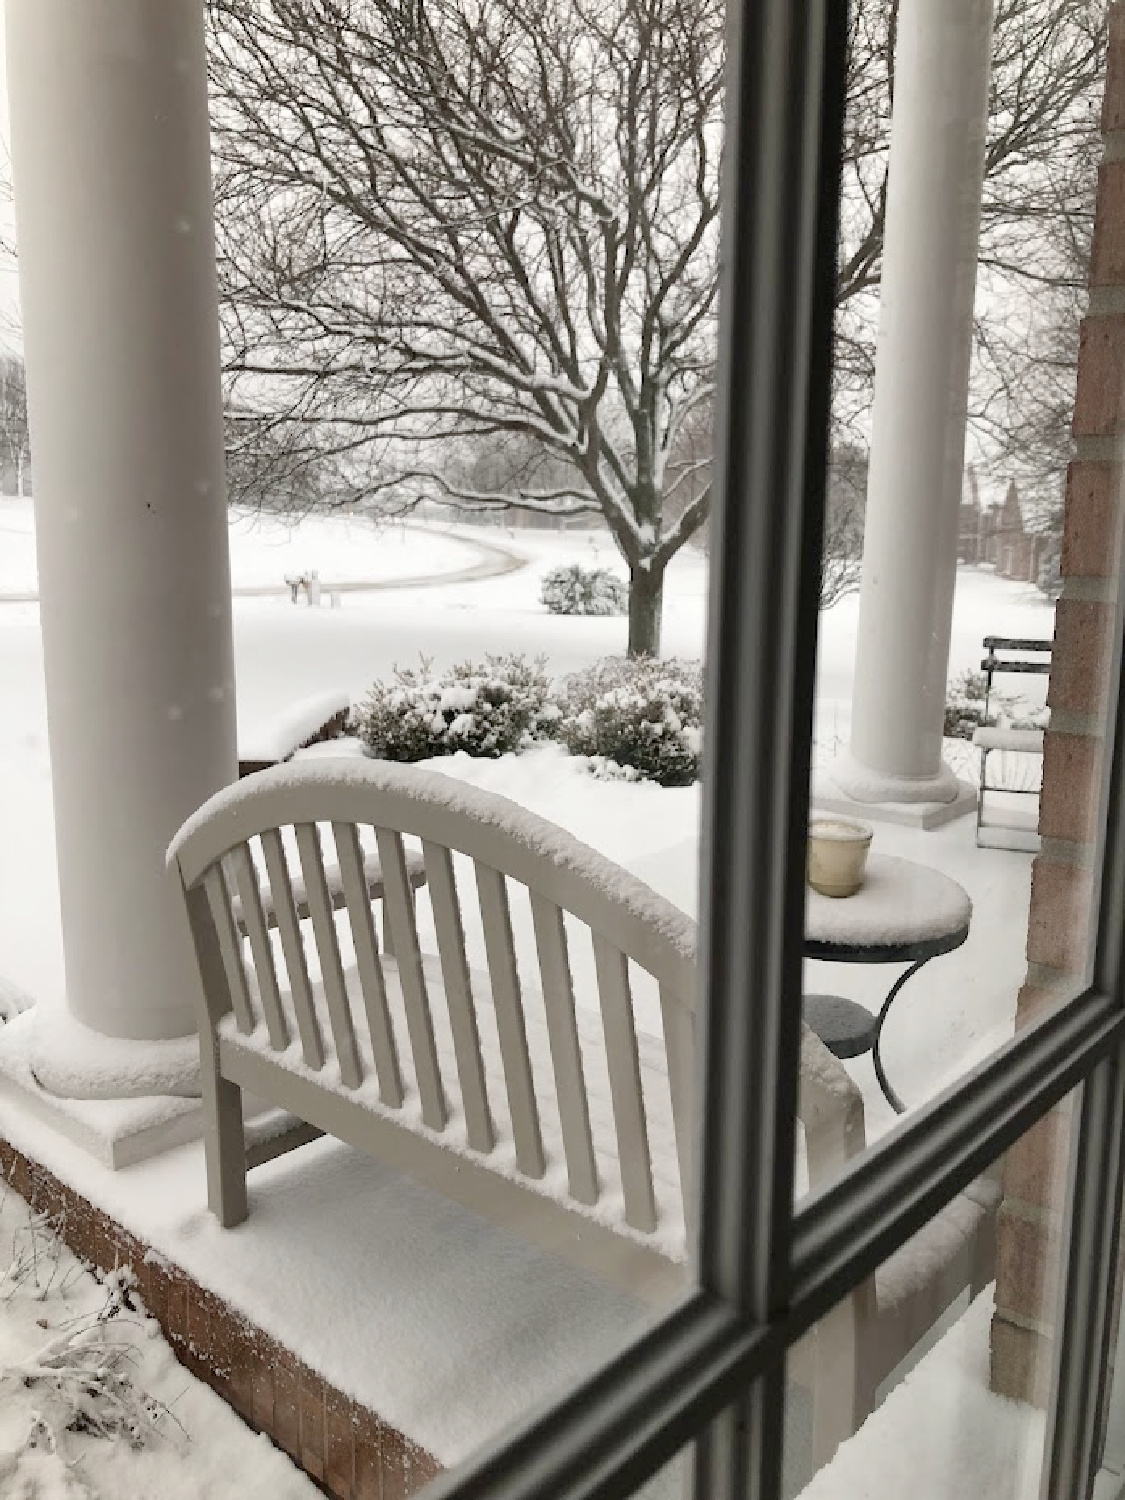 A bench on my front porch in winter snow - Hello Lovely Studio. #hellolovelyhome